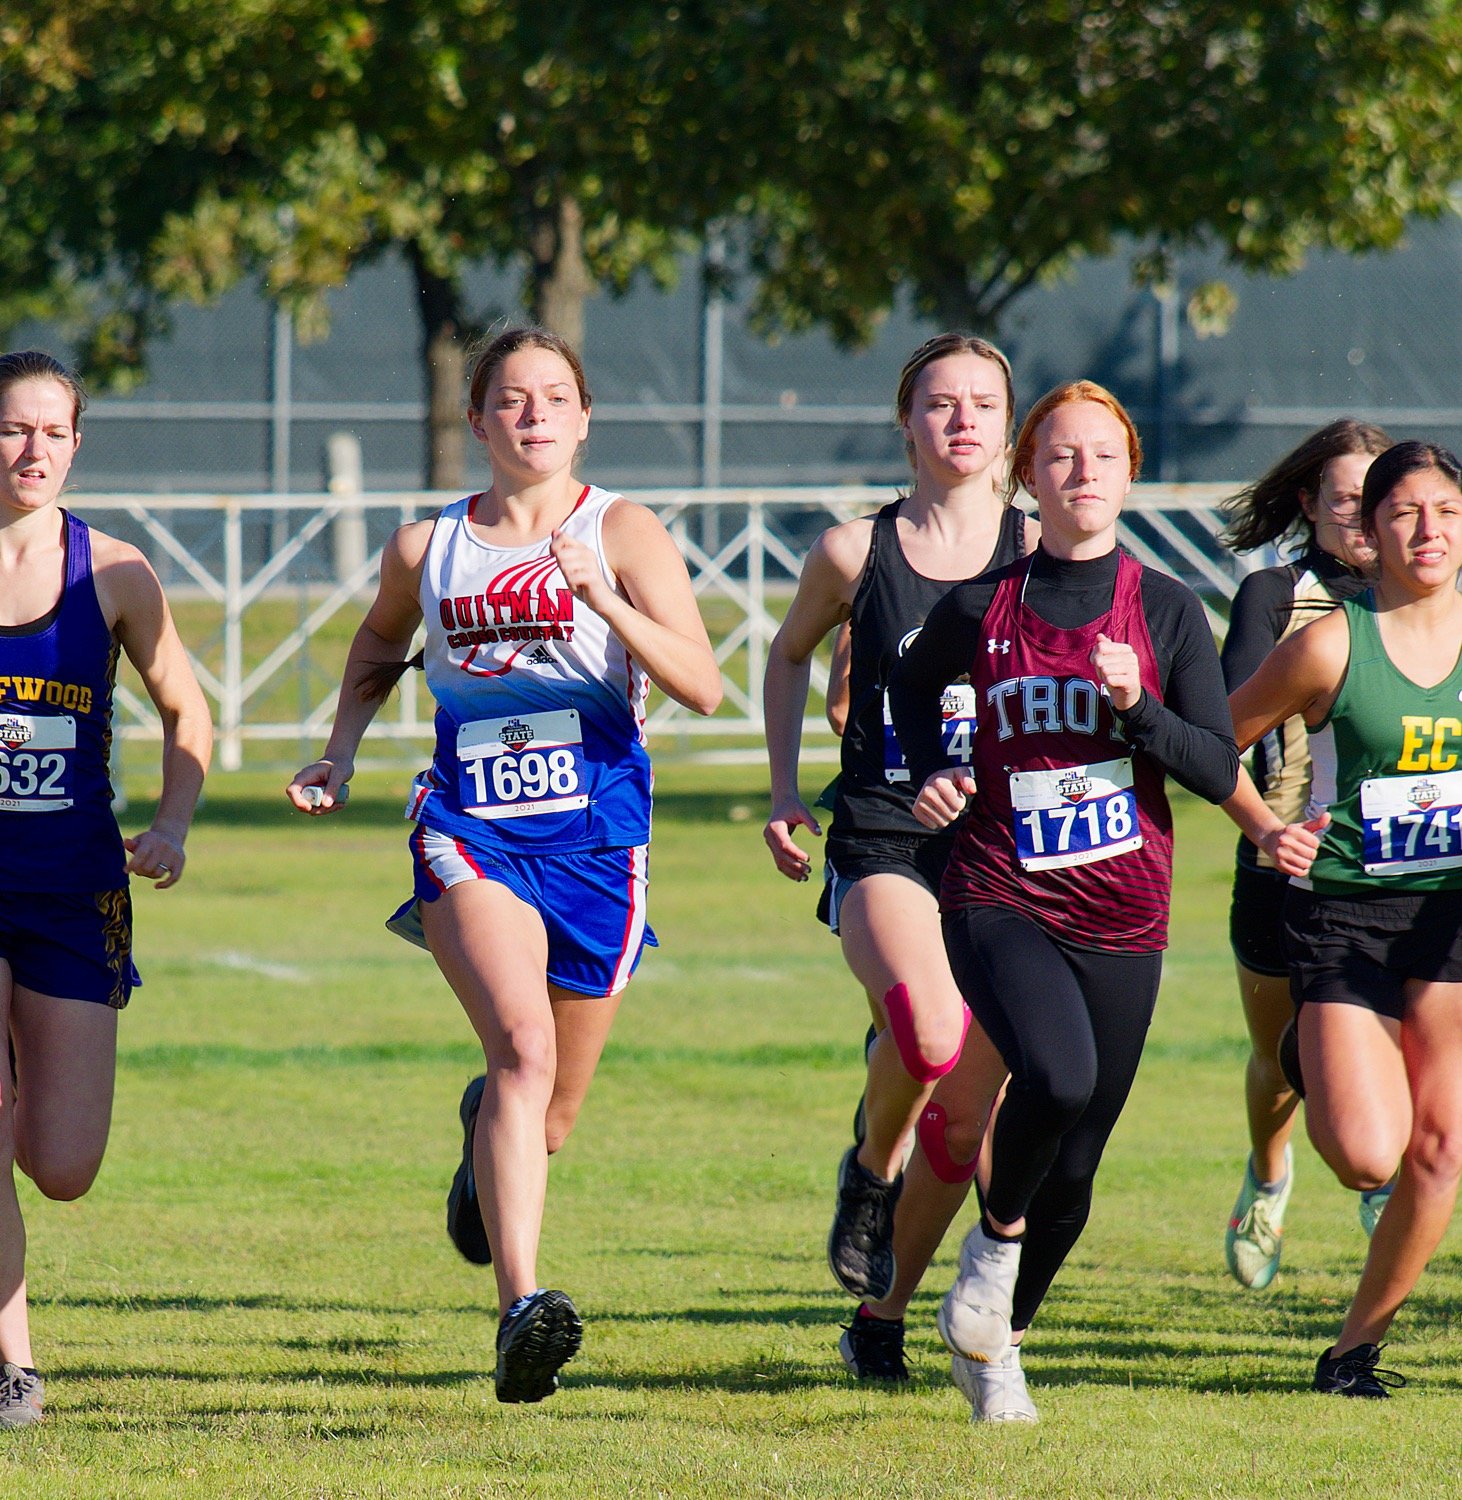 Madyson Pence finds some breathing room in the crowded start to the 2021 state cross country meet. Pence would finish in 13:00.4 for 61st place. [View more of the competition.]